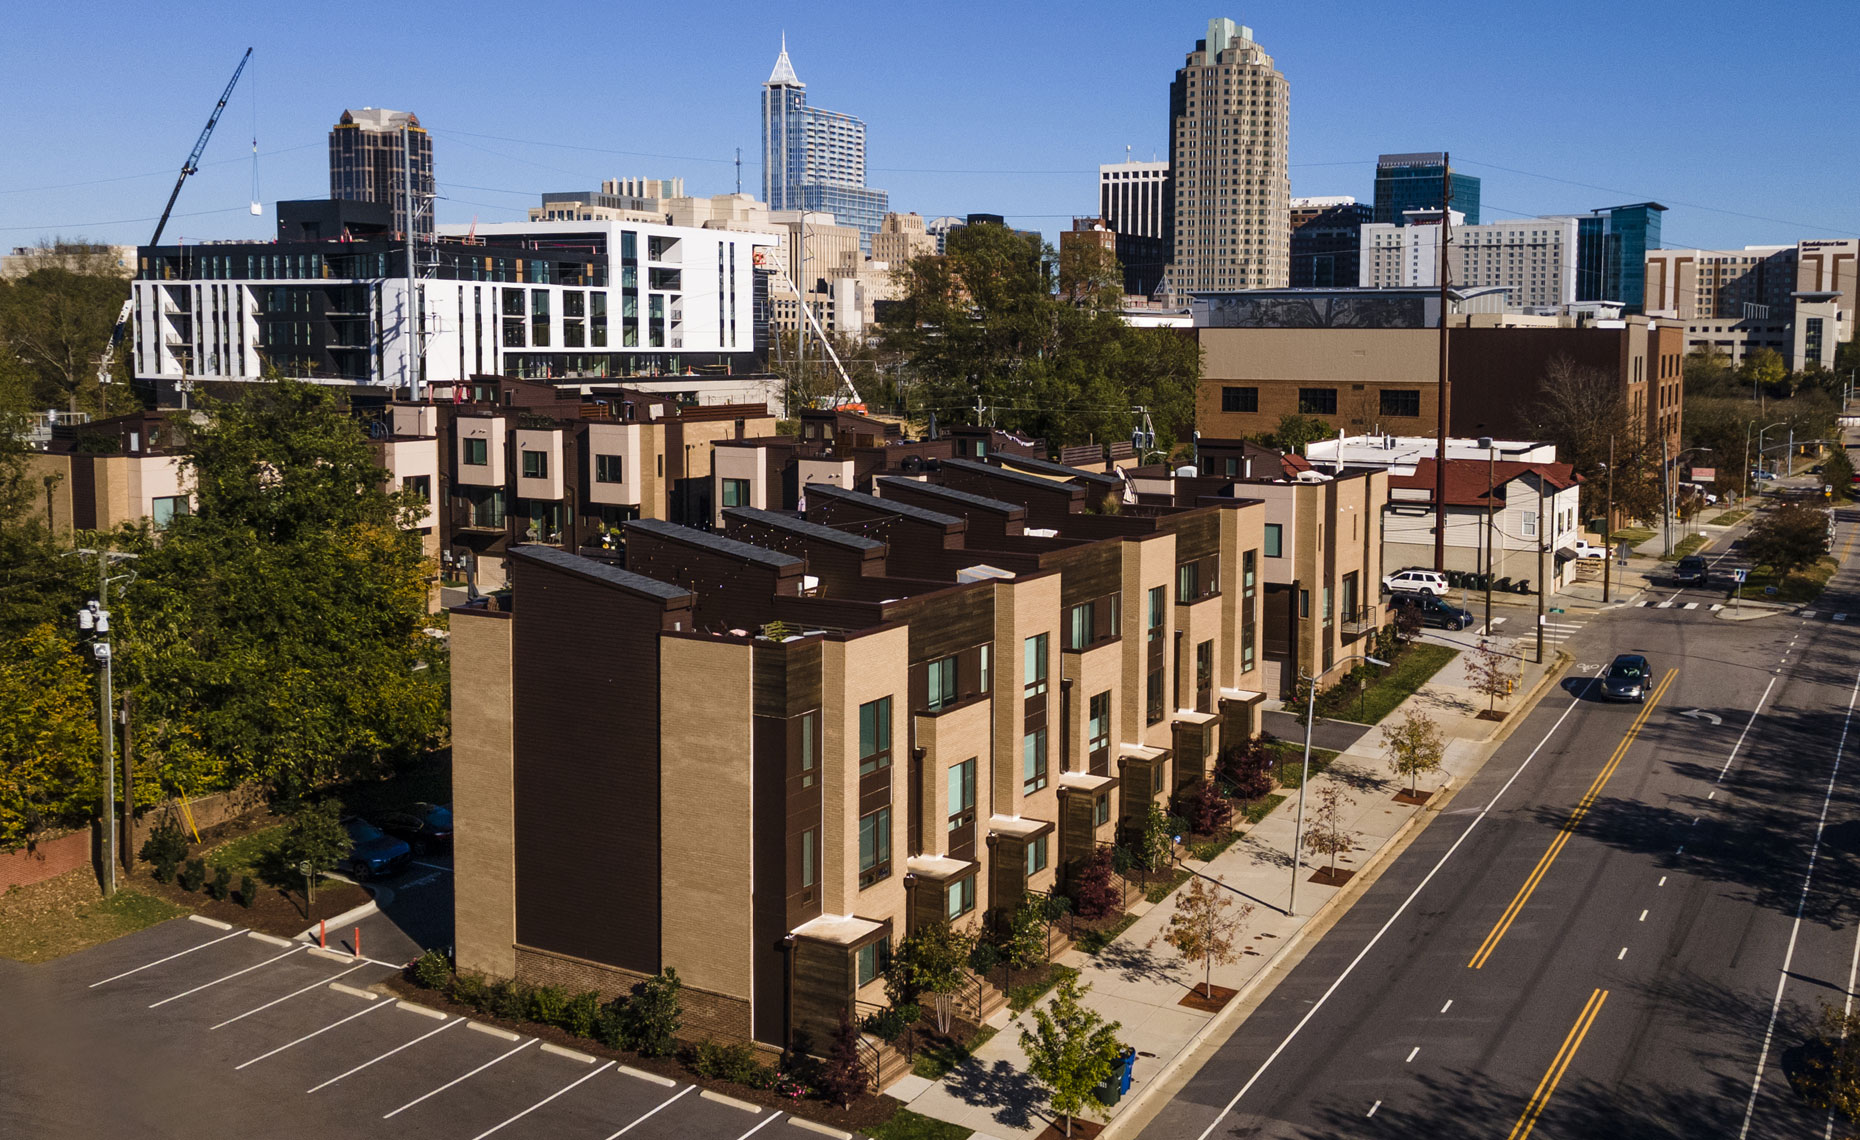 commercial real estate photography Raleigh NC Bryan Regan